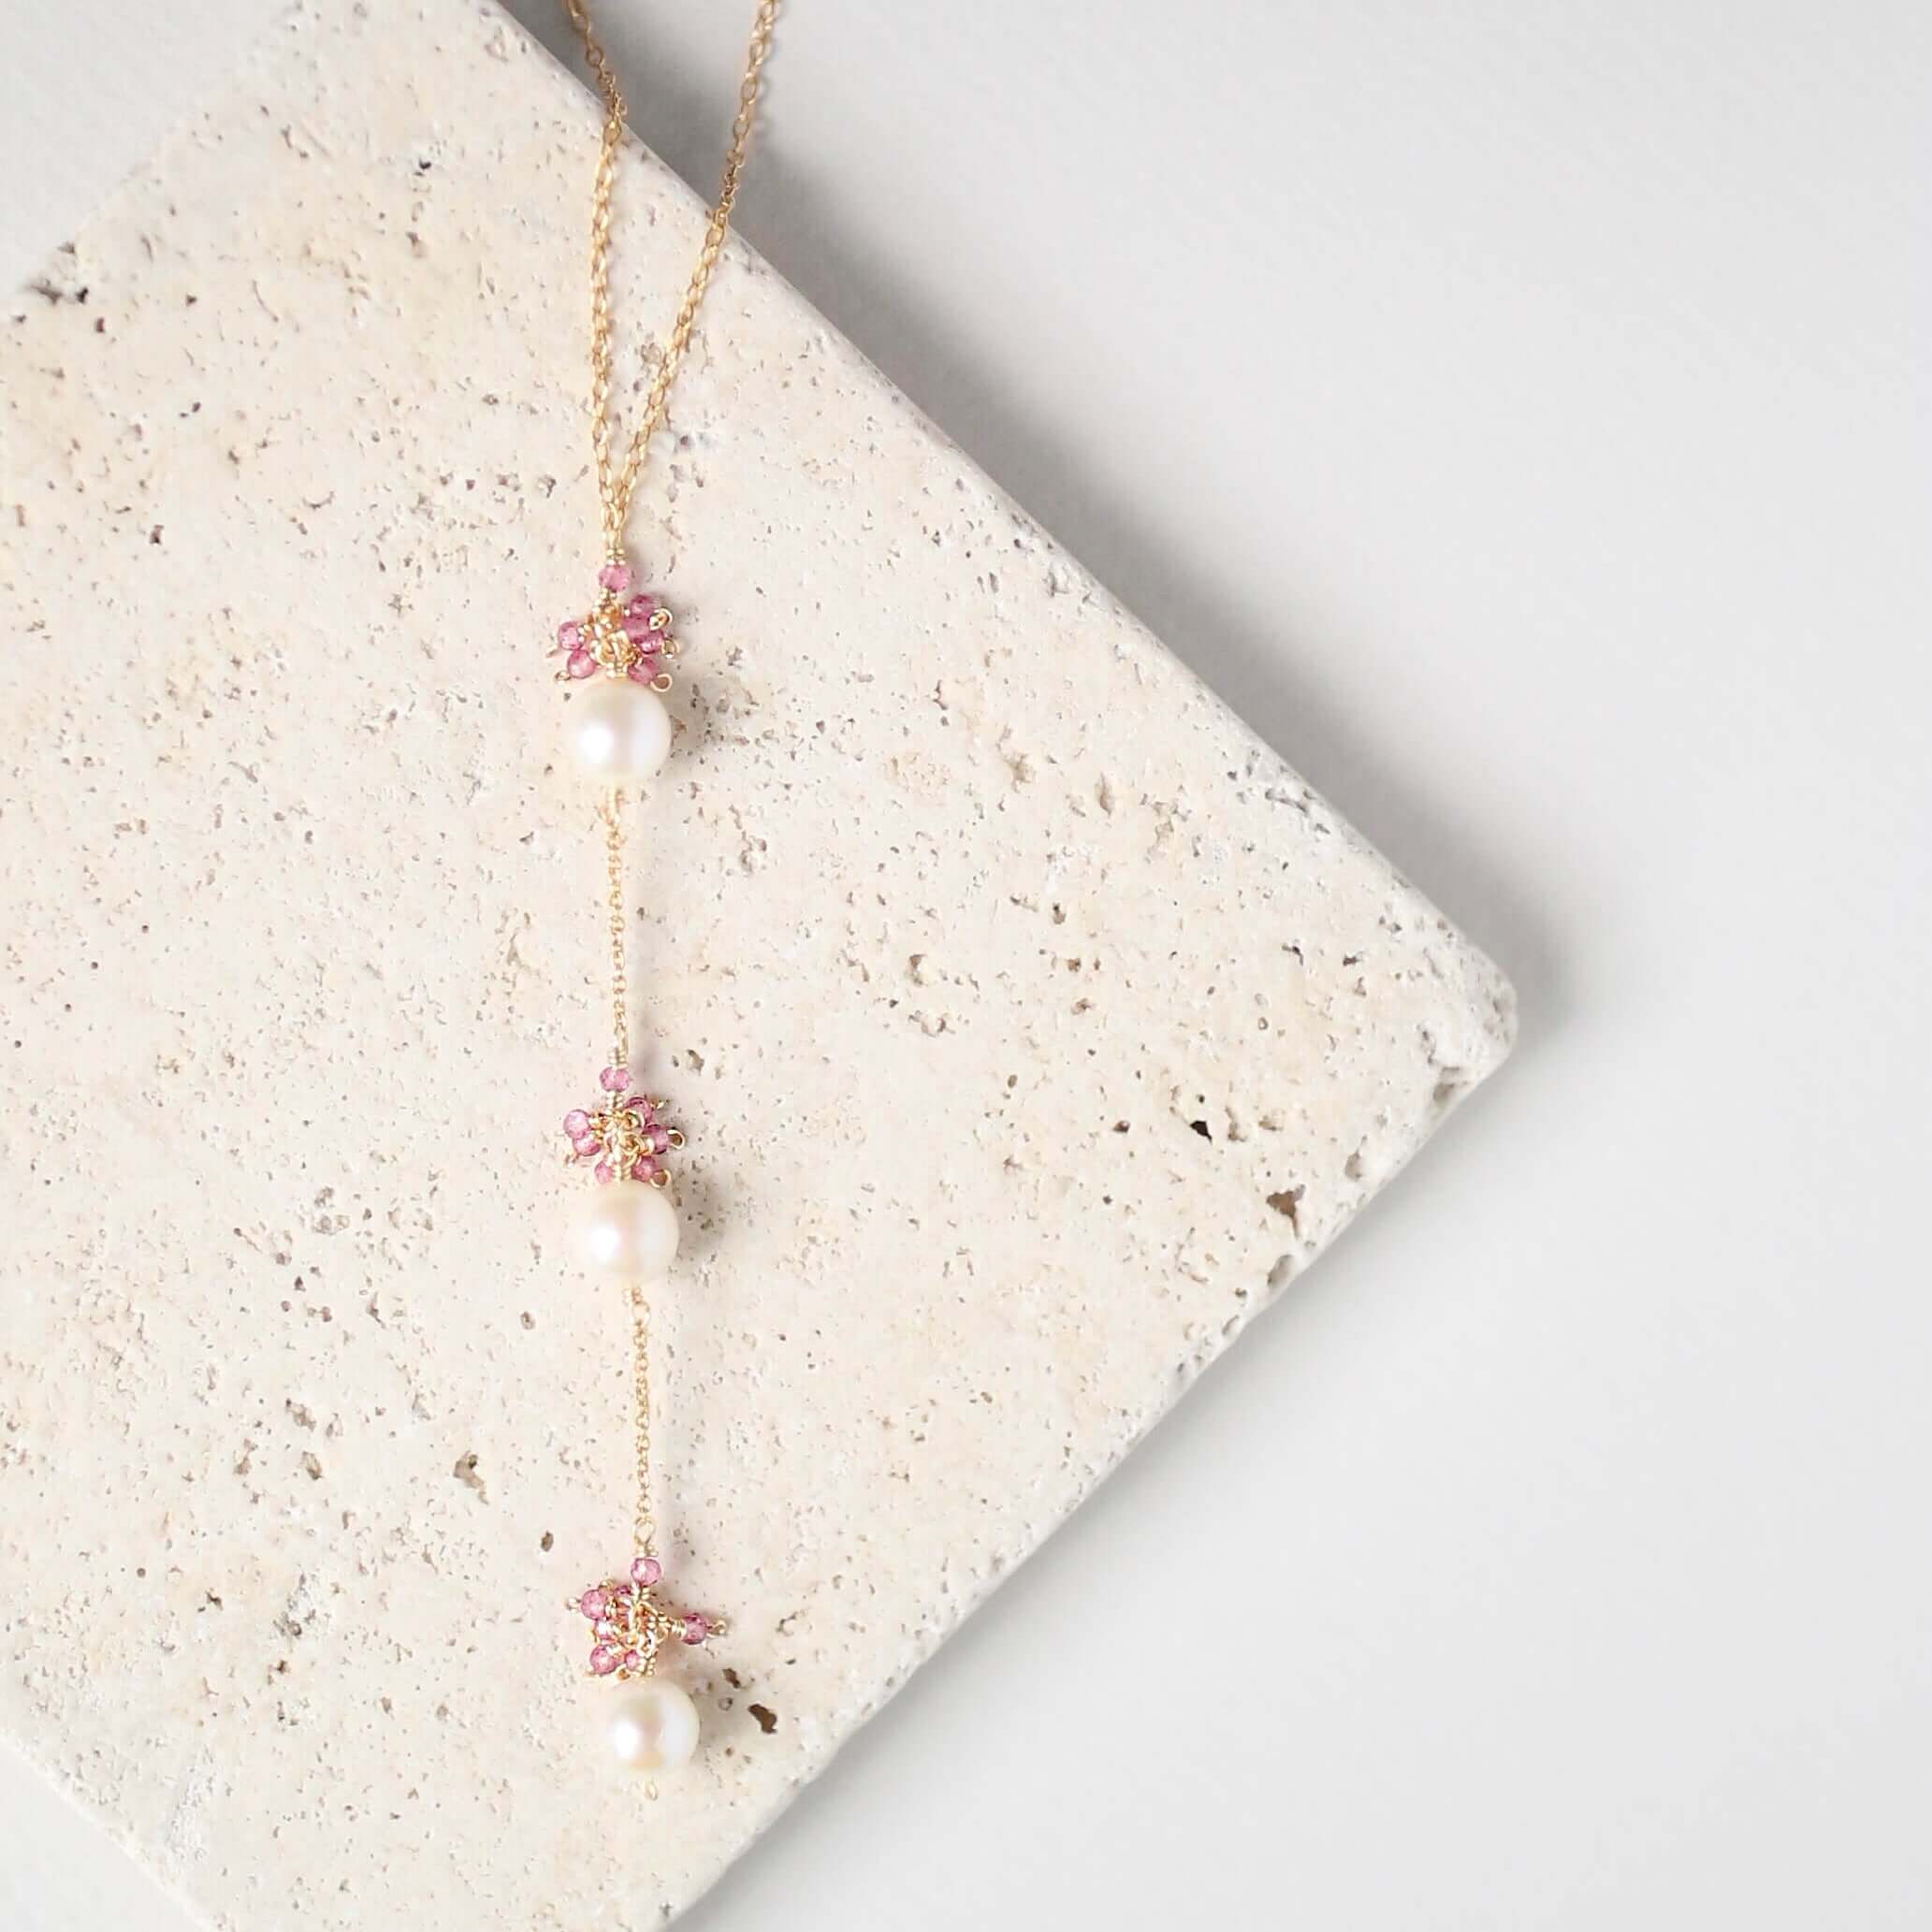 Gold plated Necklace with 3 white freshwater bead pearls paired with genuine rose quartz gemstones